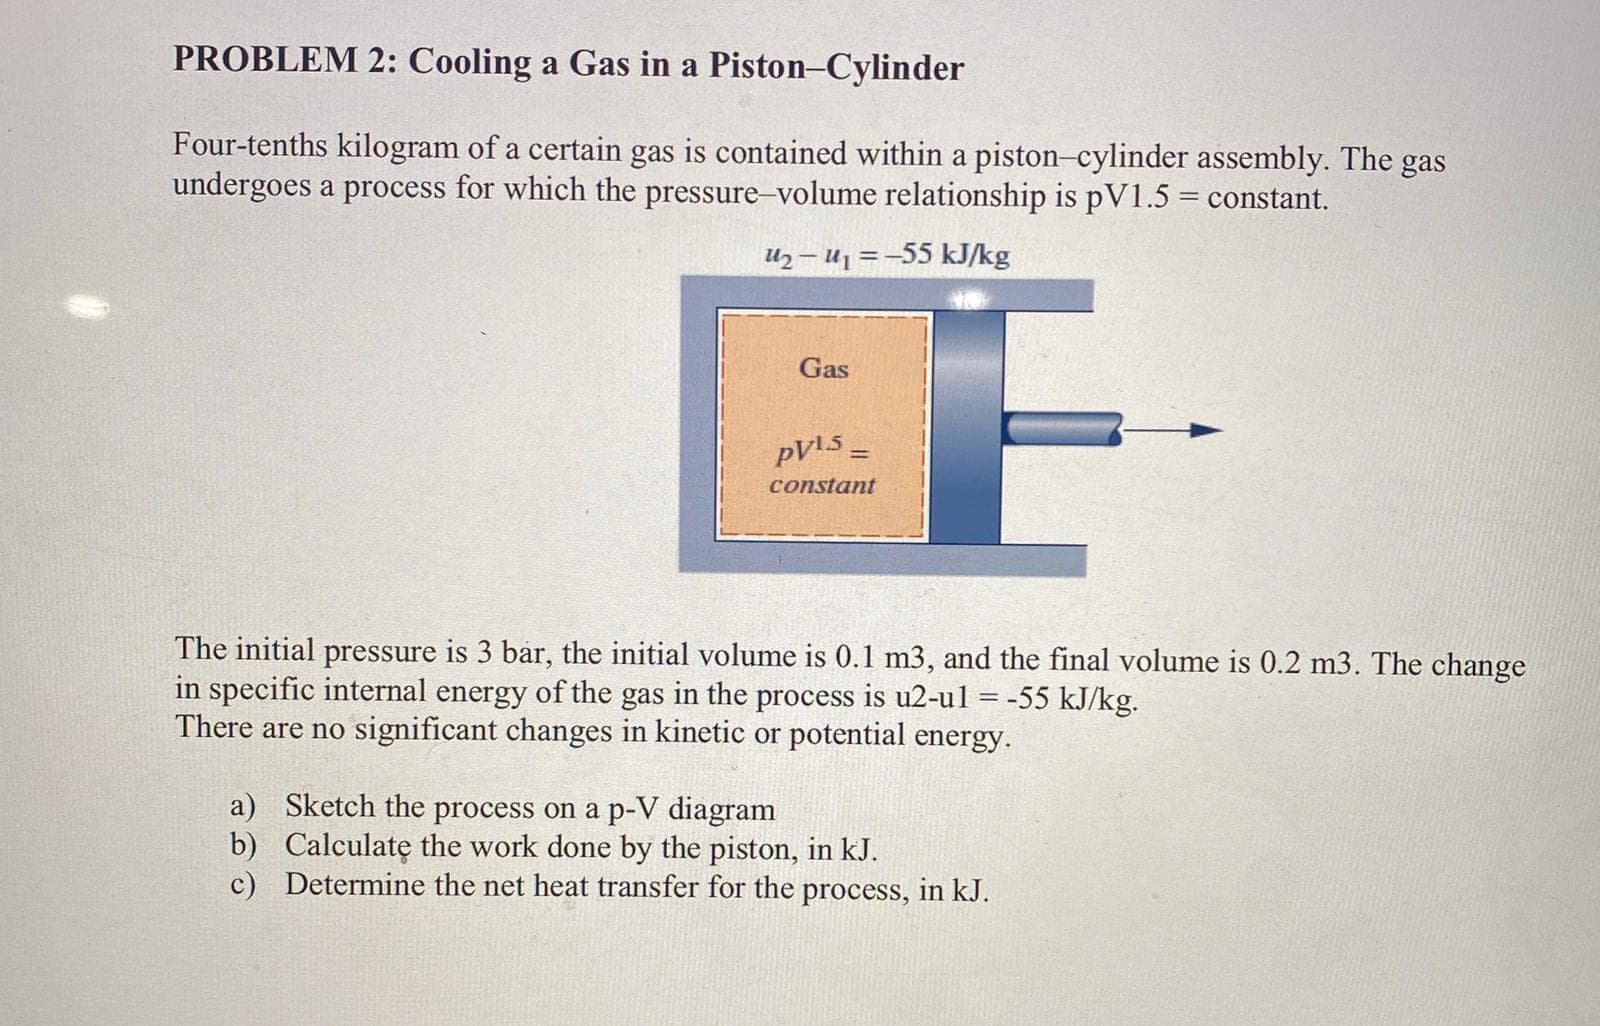 PROBLEM 2: Cooling a Gas in a Piston-Cylinder
Four-tenths kilogram of a certain gas is contained within a piston-cylinder assembly. The gas
undergoes a process for which the pressure-volume relationship is pV1.5 = constant.
U2– U1 =-55 kJ/kg
E-
Gas
%3D
constant
The initial pressure is 3 bar, the initial volume is 0.1 m3, and the final volume is 0.2 m3. The change
in specific internal energy of the gas in the process is u2-ul = -55 kJ/kg.
There are no significant changes in kinetic or potential energy.
a) Sketch the process on a p-V diagram
b) Calculatę the work done by the piston, in kJ.
c) Determine the net heat transfer for the process, in kJ.
